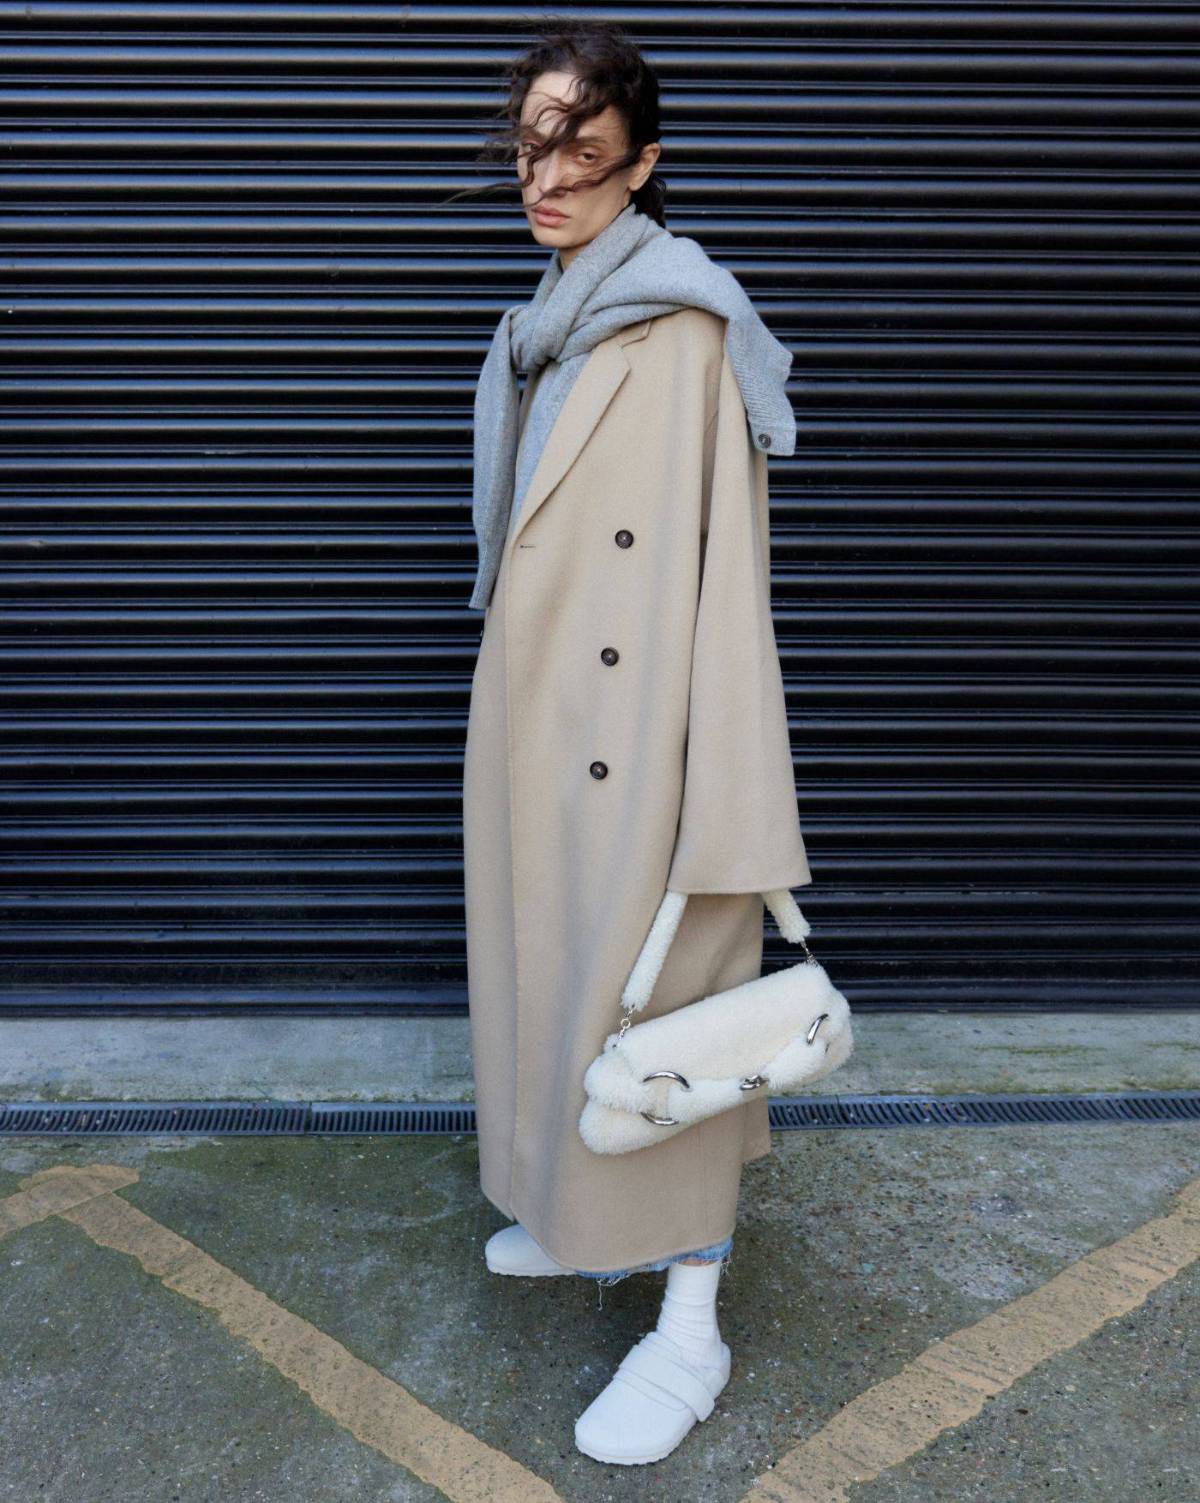 Toteme Beige Signature double-breasted wool coat, Gucci White Horsebit shearling shoulder bag, Birkenstock x Tekla White Nagoya shearling-lined suede clogs outfit